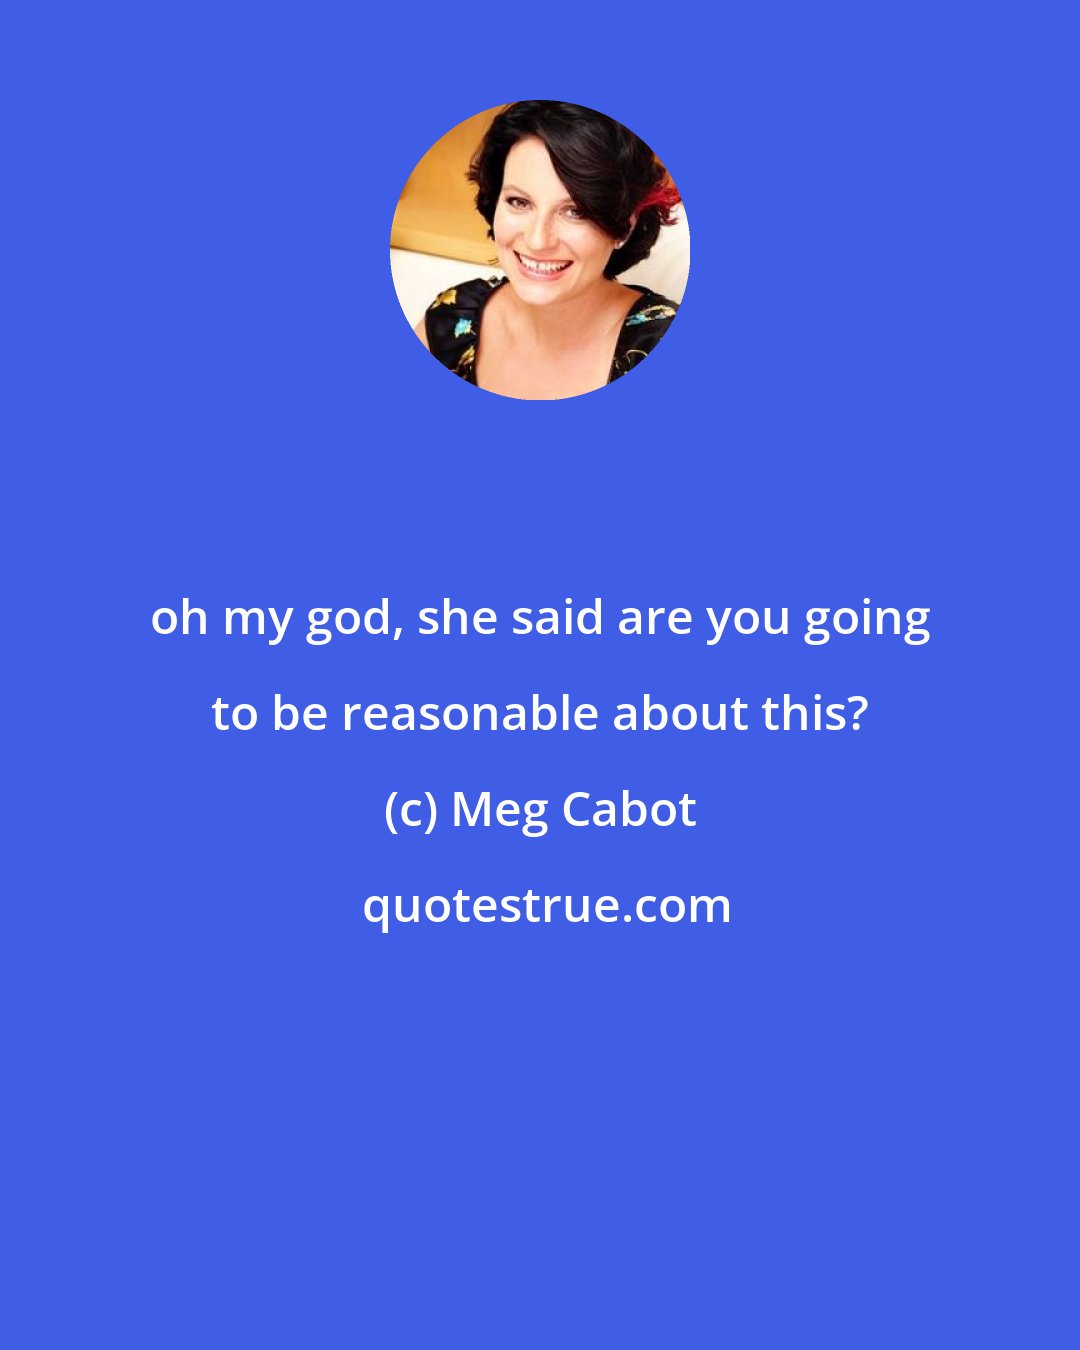 Meg Cabot: oh my god, she said are you going to be reasonable about this?